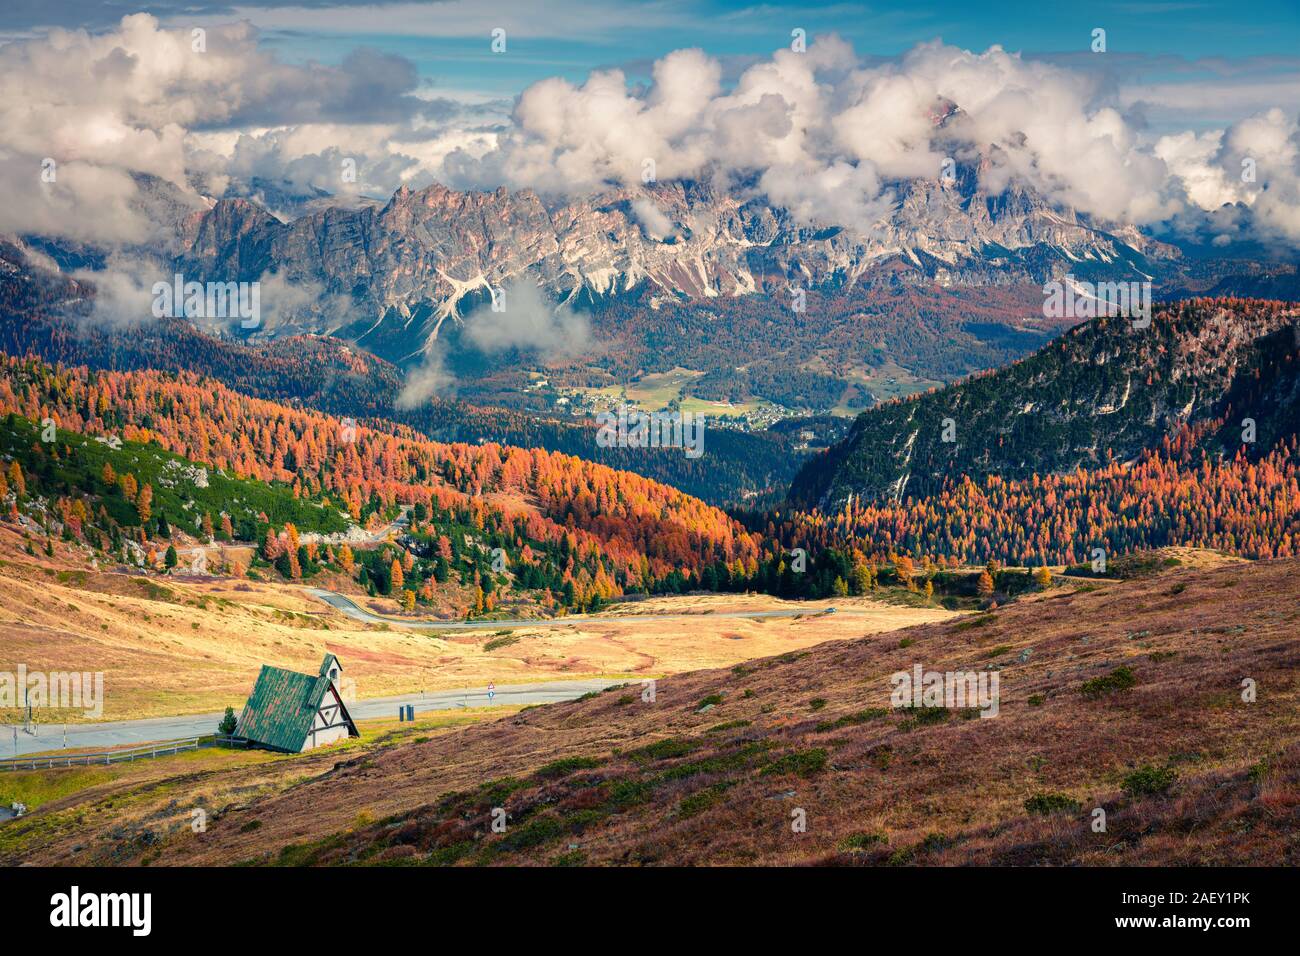 Sunny morning view from the top of Giau pass. Colorful autumn landscape in Dolomite Alps, Cortina d'Ampezzo location, Italy, Europe. Stock Photo